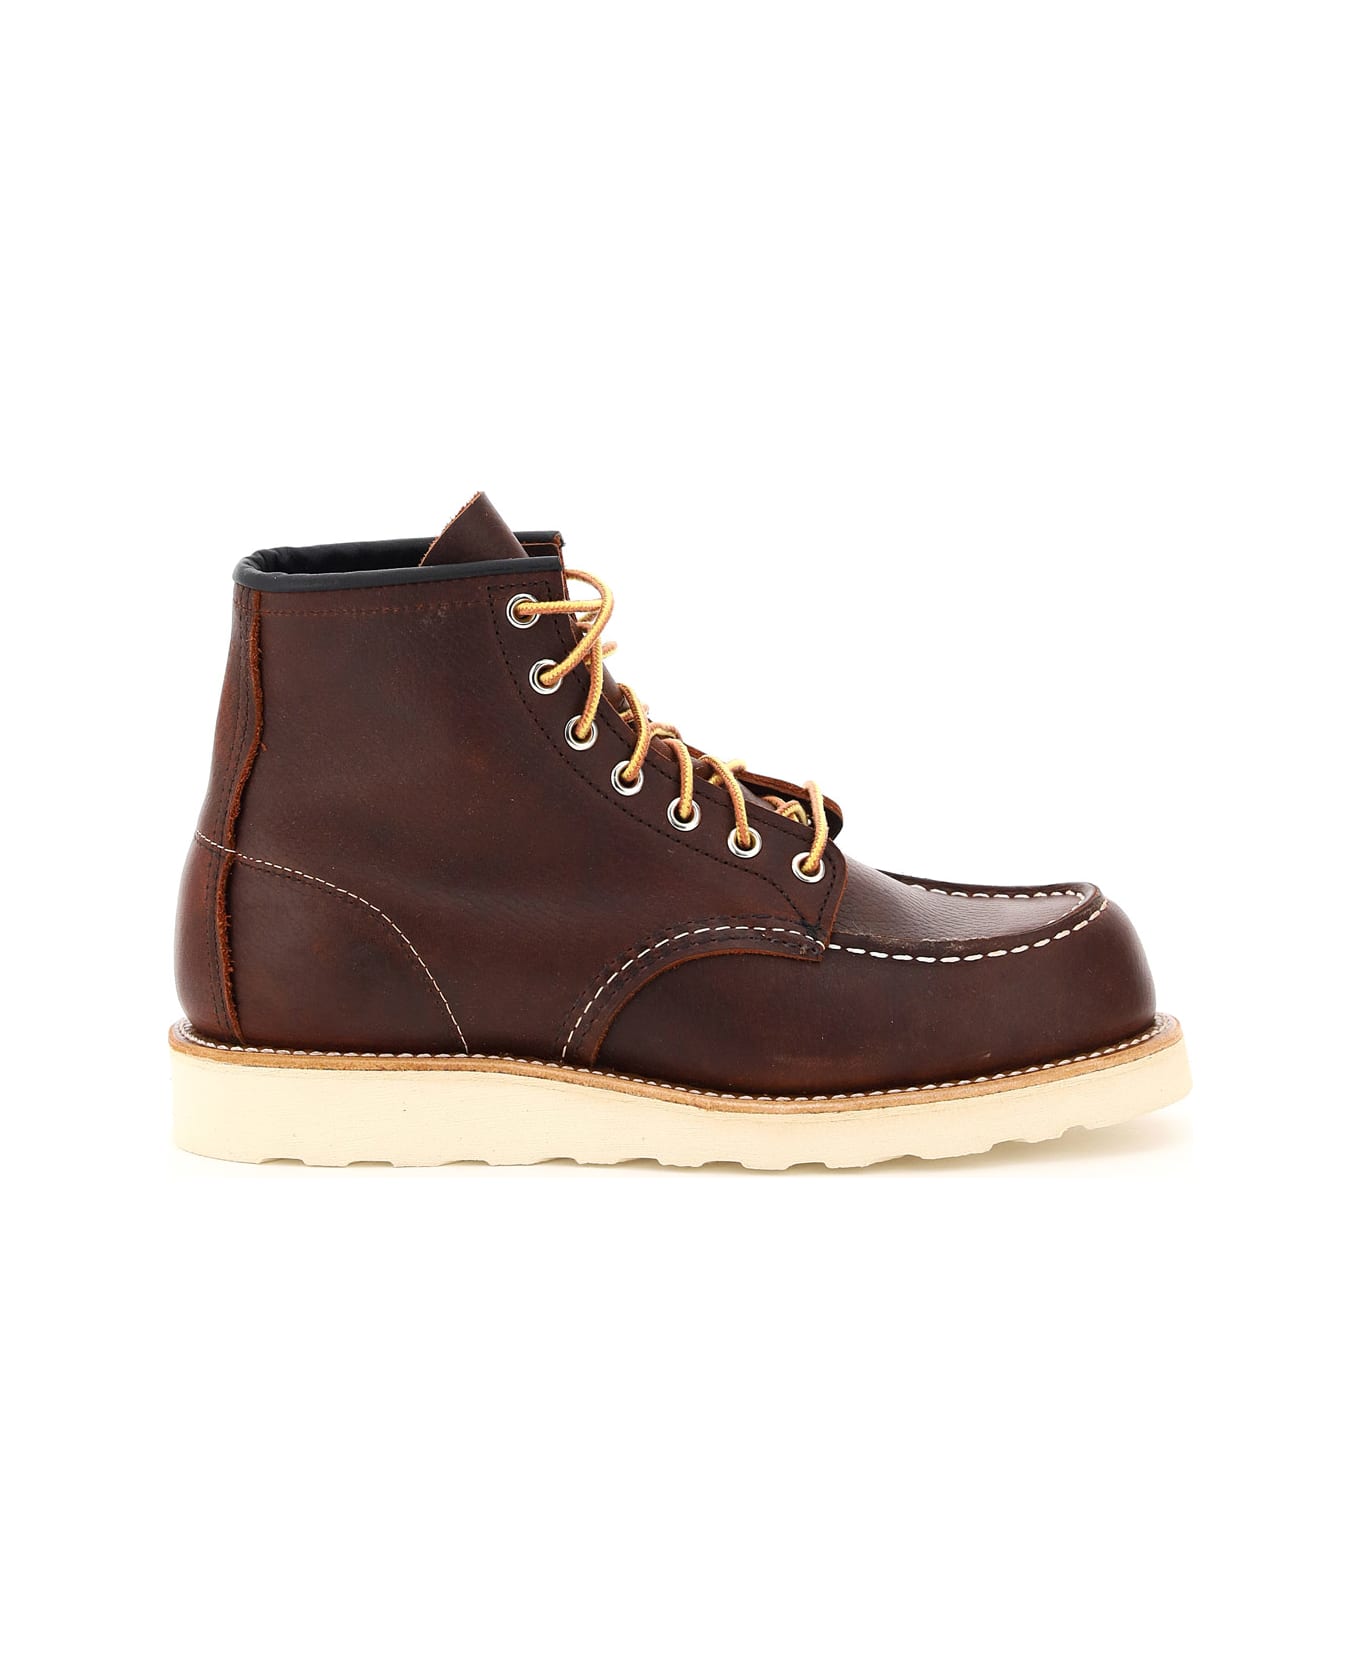 Red Wing Classic Moc Ankle Boots - BRIAR OIL (Brown)